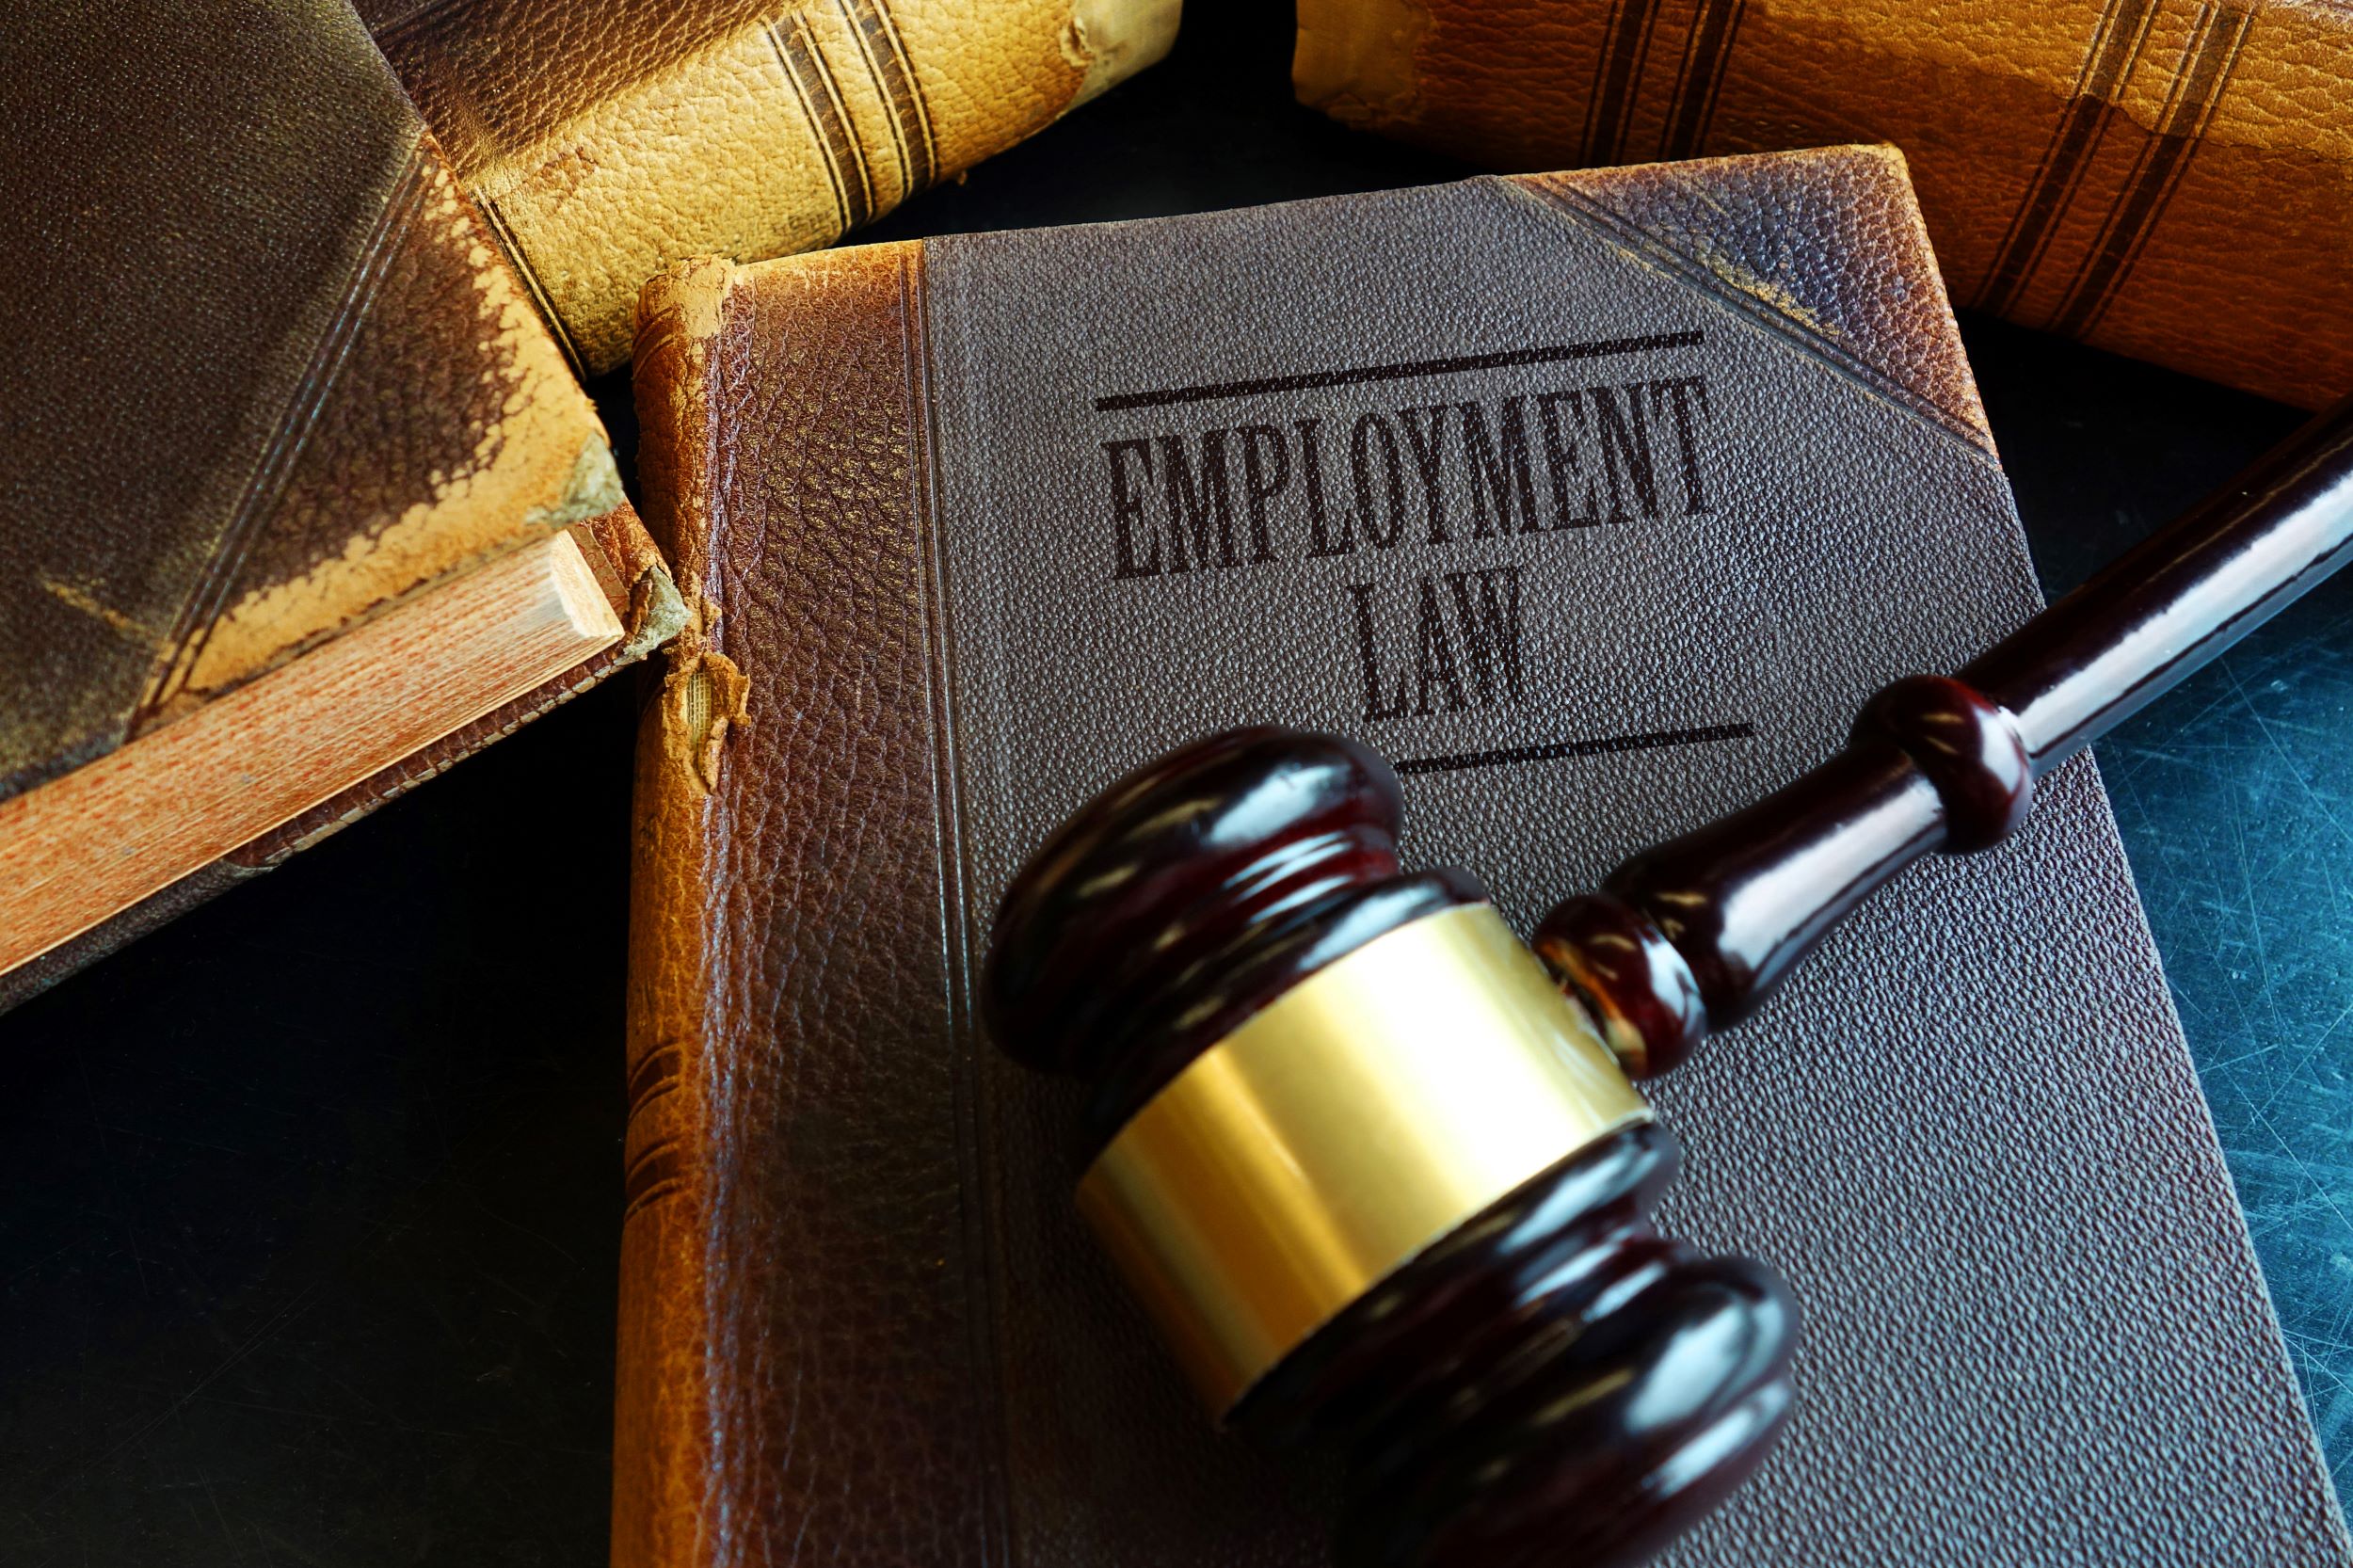 employment law for employers